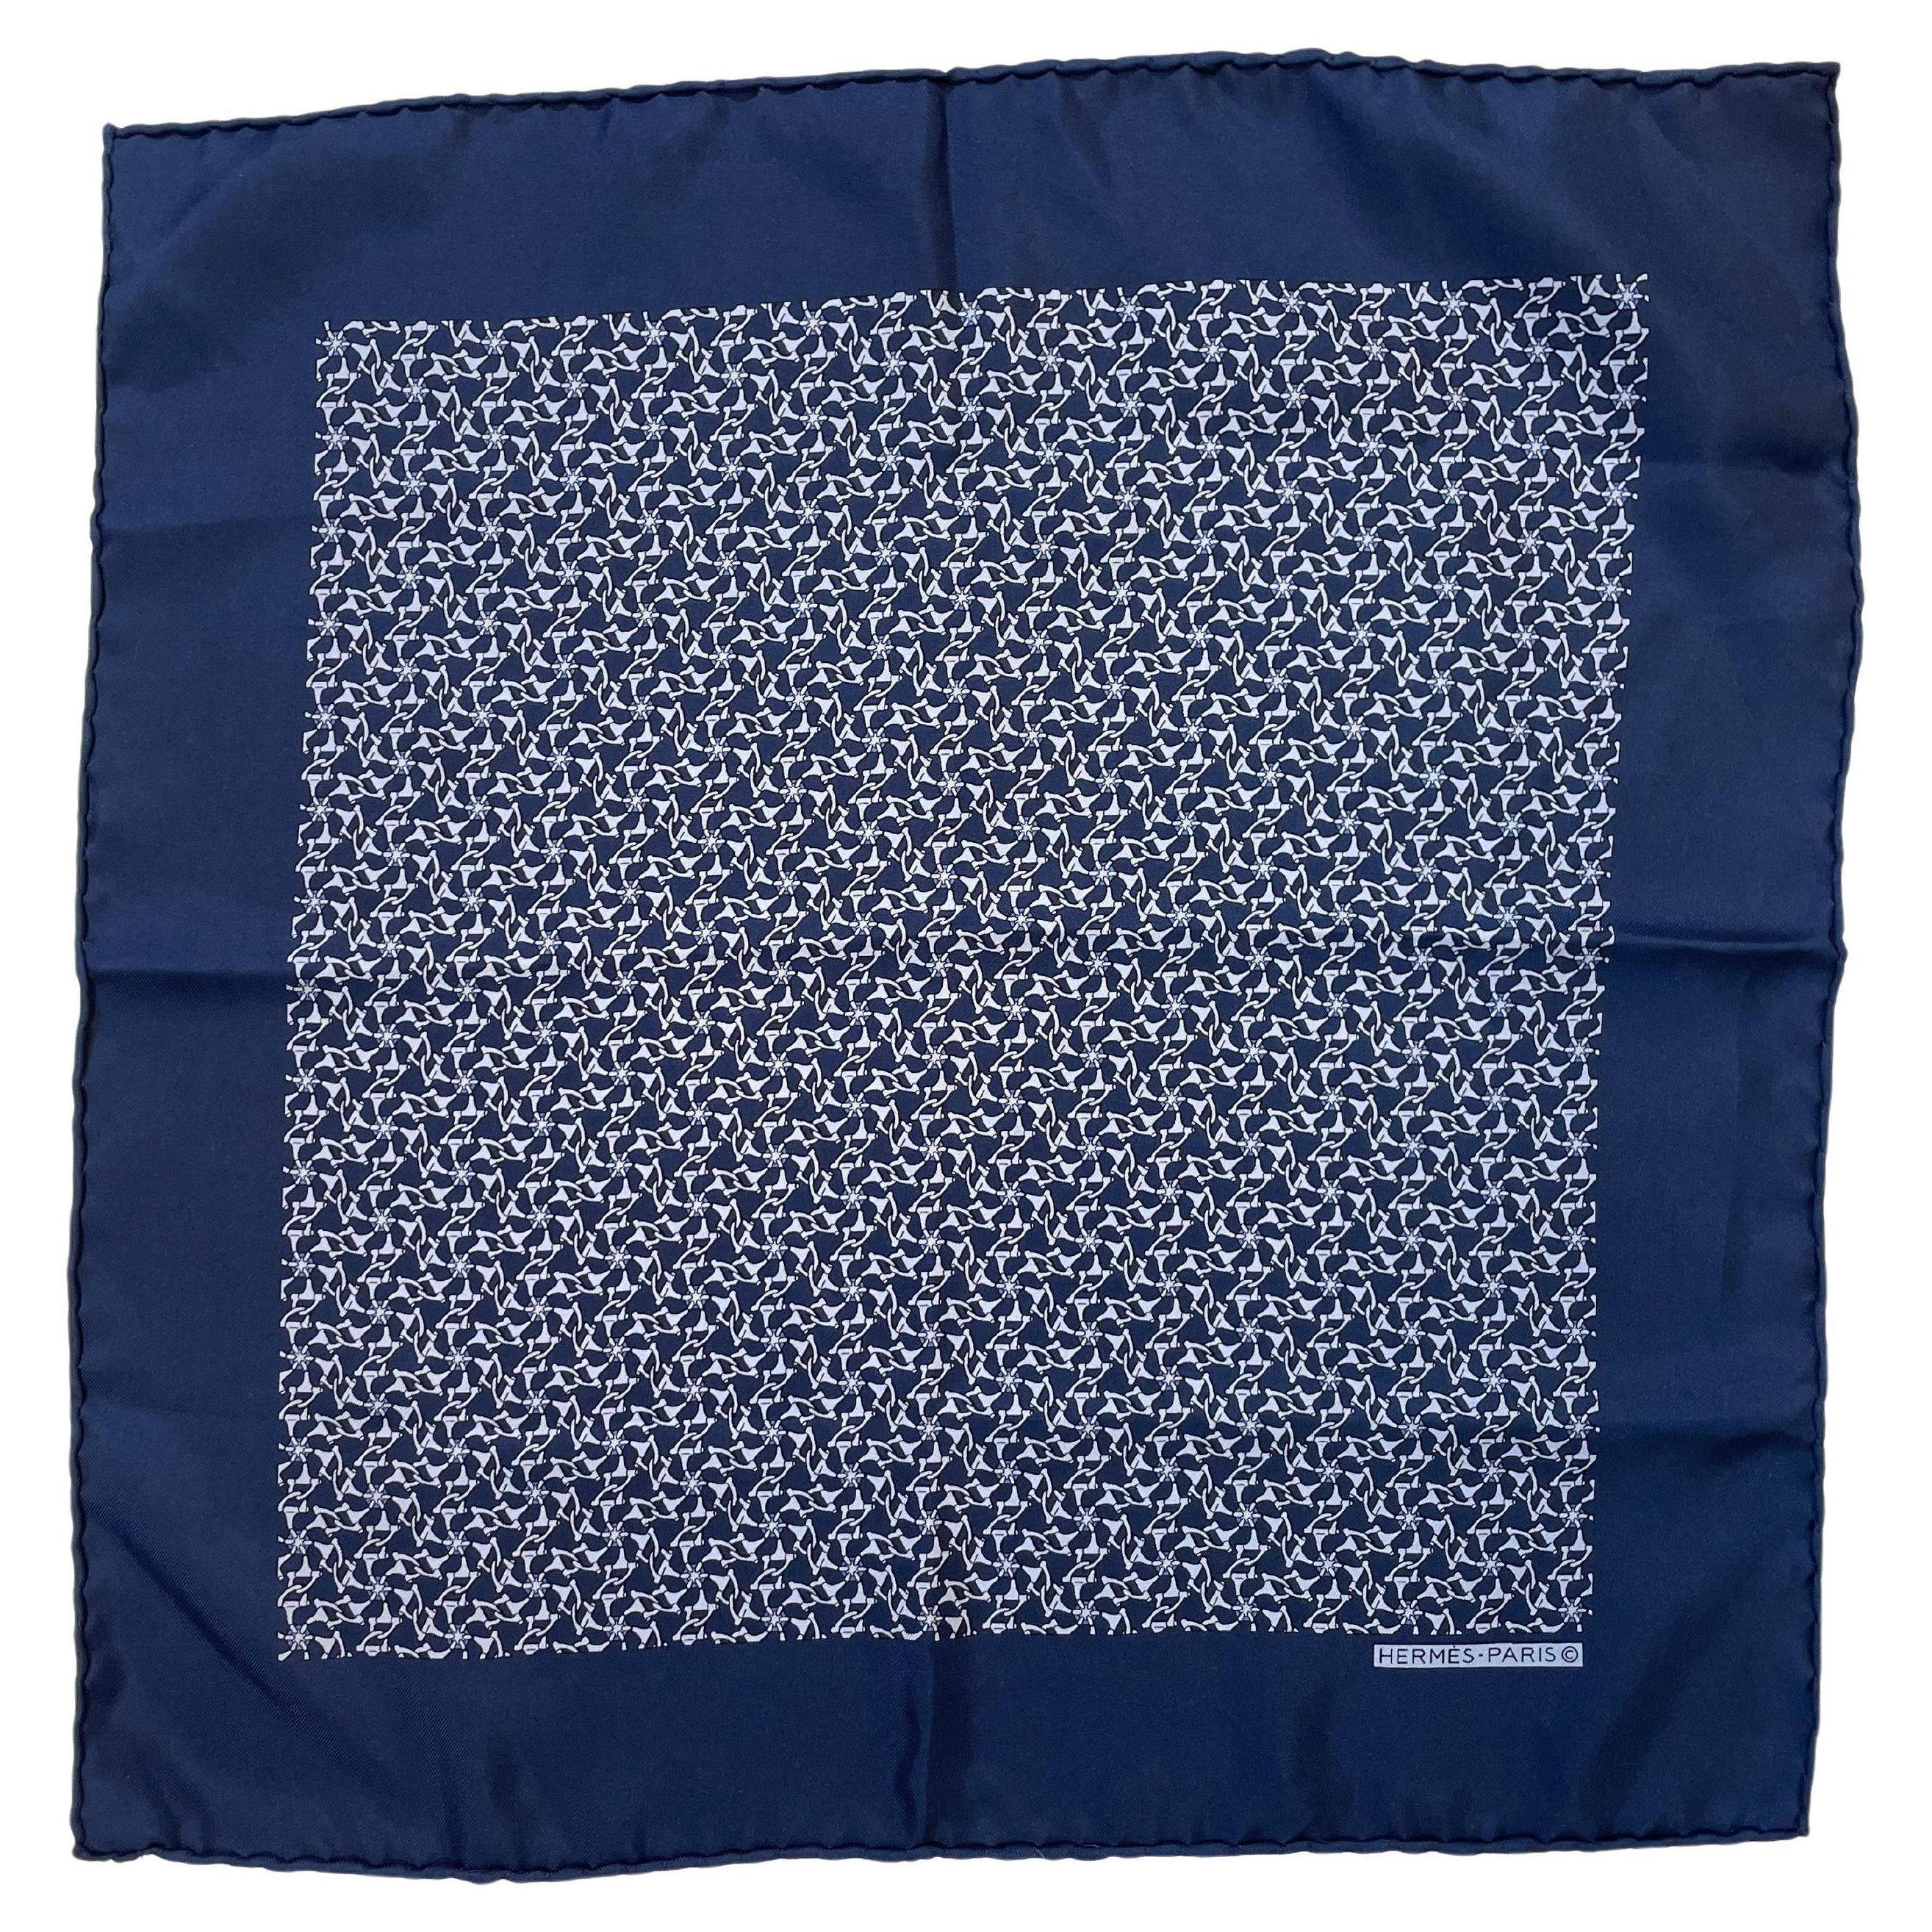 HERMES PARIS navy blue equestrian silk scarf pocket square with hand-rolled edges.
This is a must-have accessory for every man's wardrobe.
Silk navy blue neckerchief bandana small size with horse bit pattern luxury Hermes Paris.
“Hermes Paris”